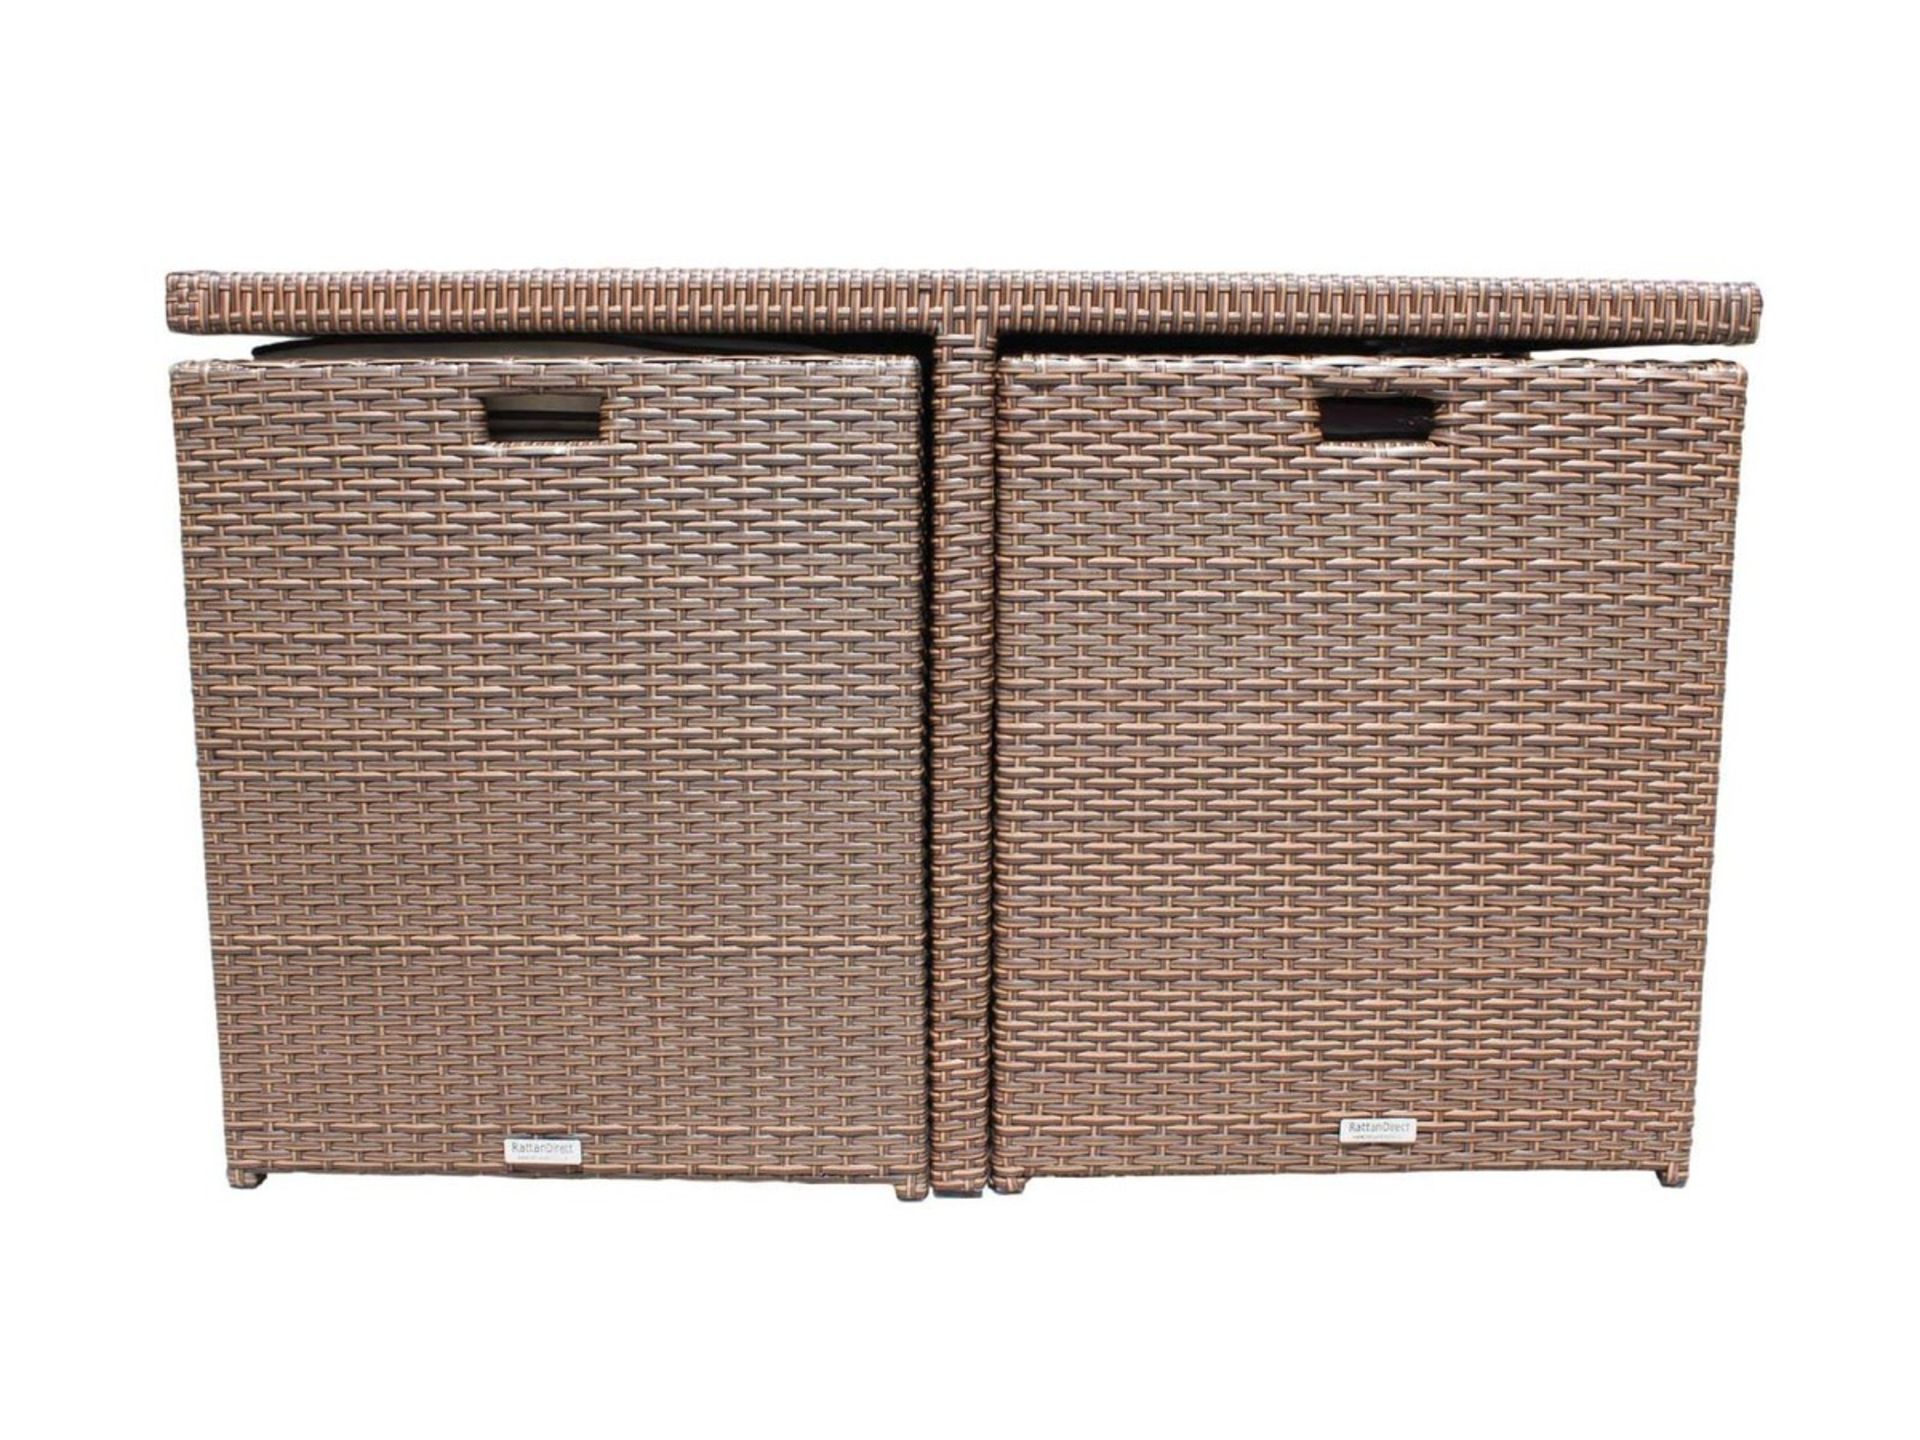 The Barcelona 9 Piece Rattan Garden Cube Set in chocolate brown mix rattan. - Image 3 of 3